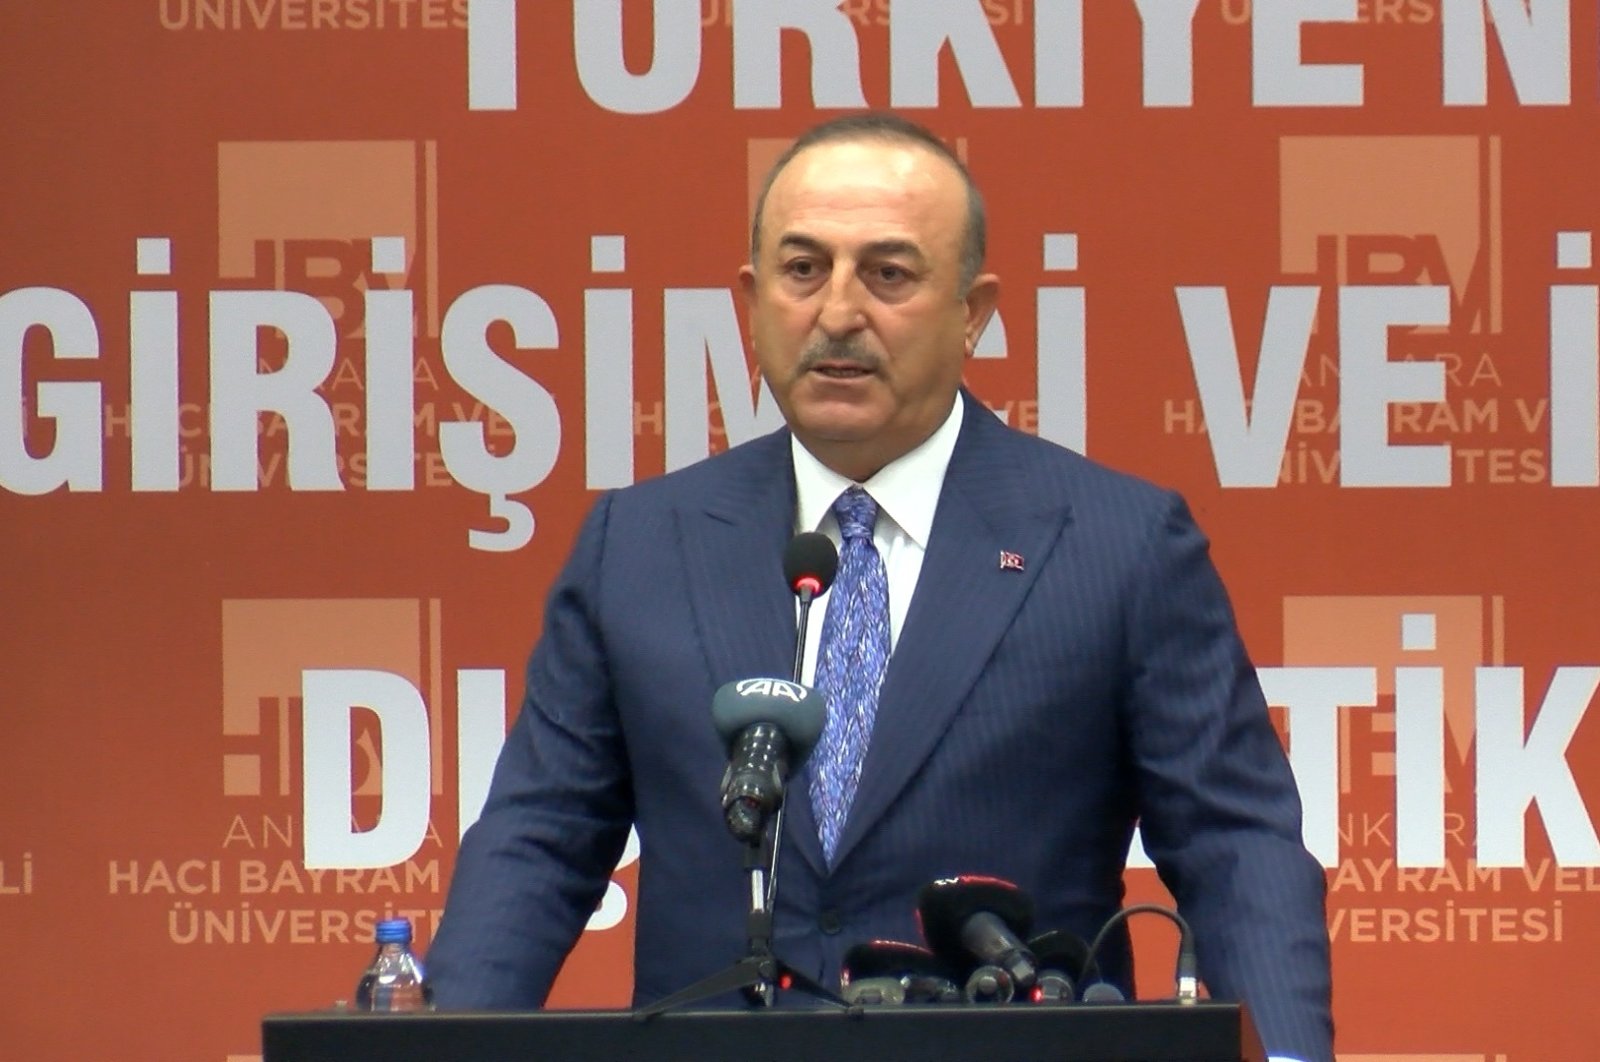 Turkish Foreign Minister Mevlüt Çavuşoğlu speaks at &quot;Türkiye’s Enterprising and Humanitarian Foreign Policy Conference” in Ankara on Monday, Dec. 5, 2022. (DHA Photo)